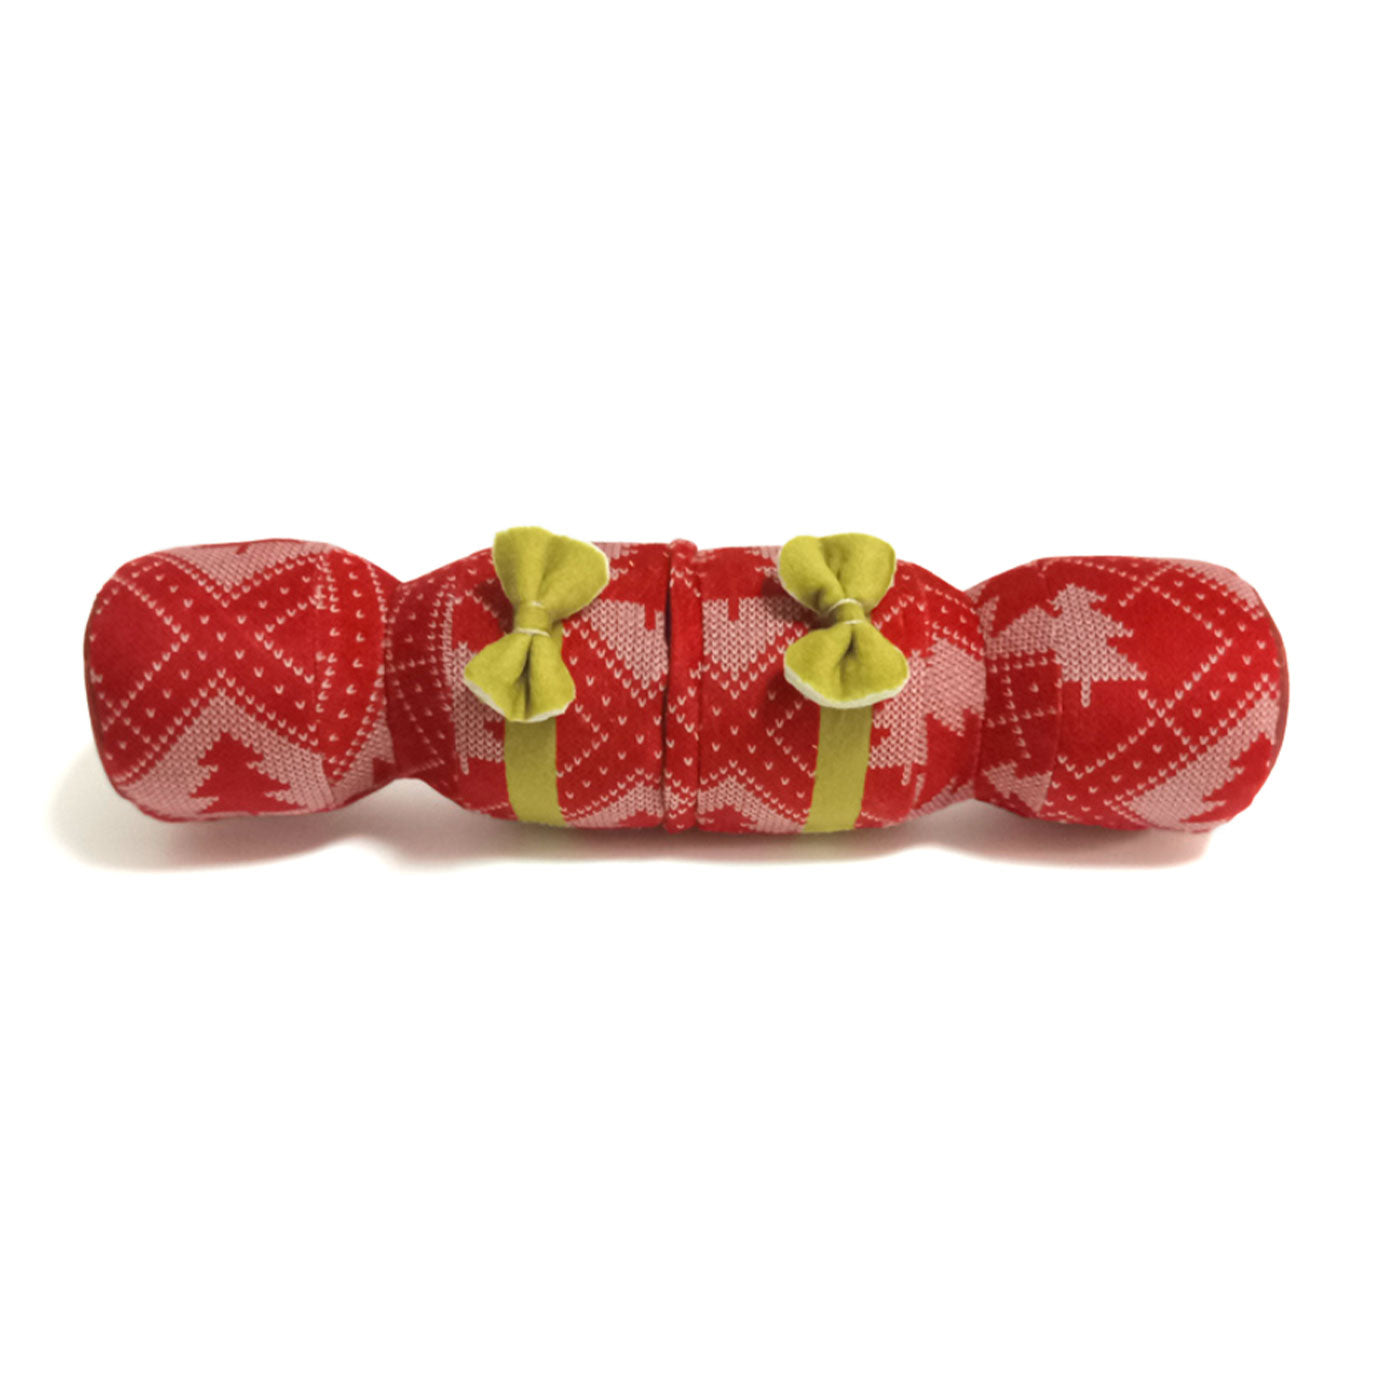 CatwalkDog Christmas Cracker Dog Toy, The Perfect Pet Toy For Christmas, Available Now at Lords & Labradors